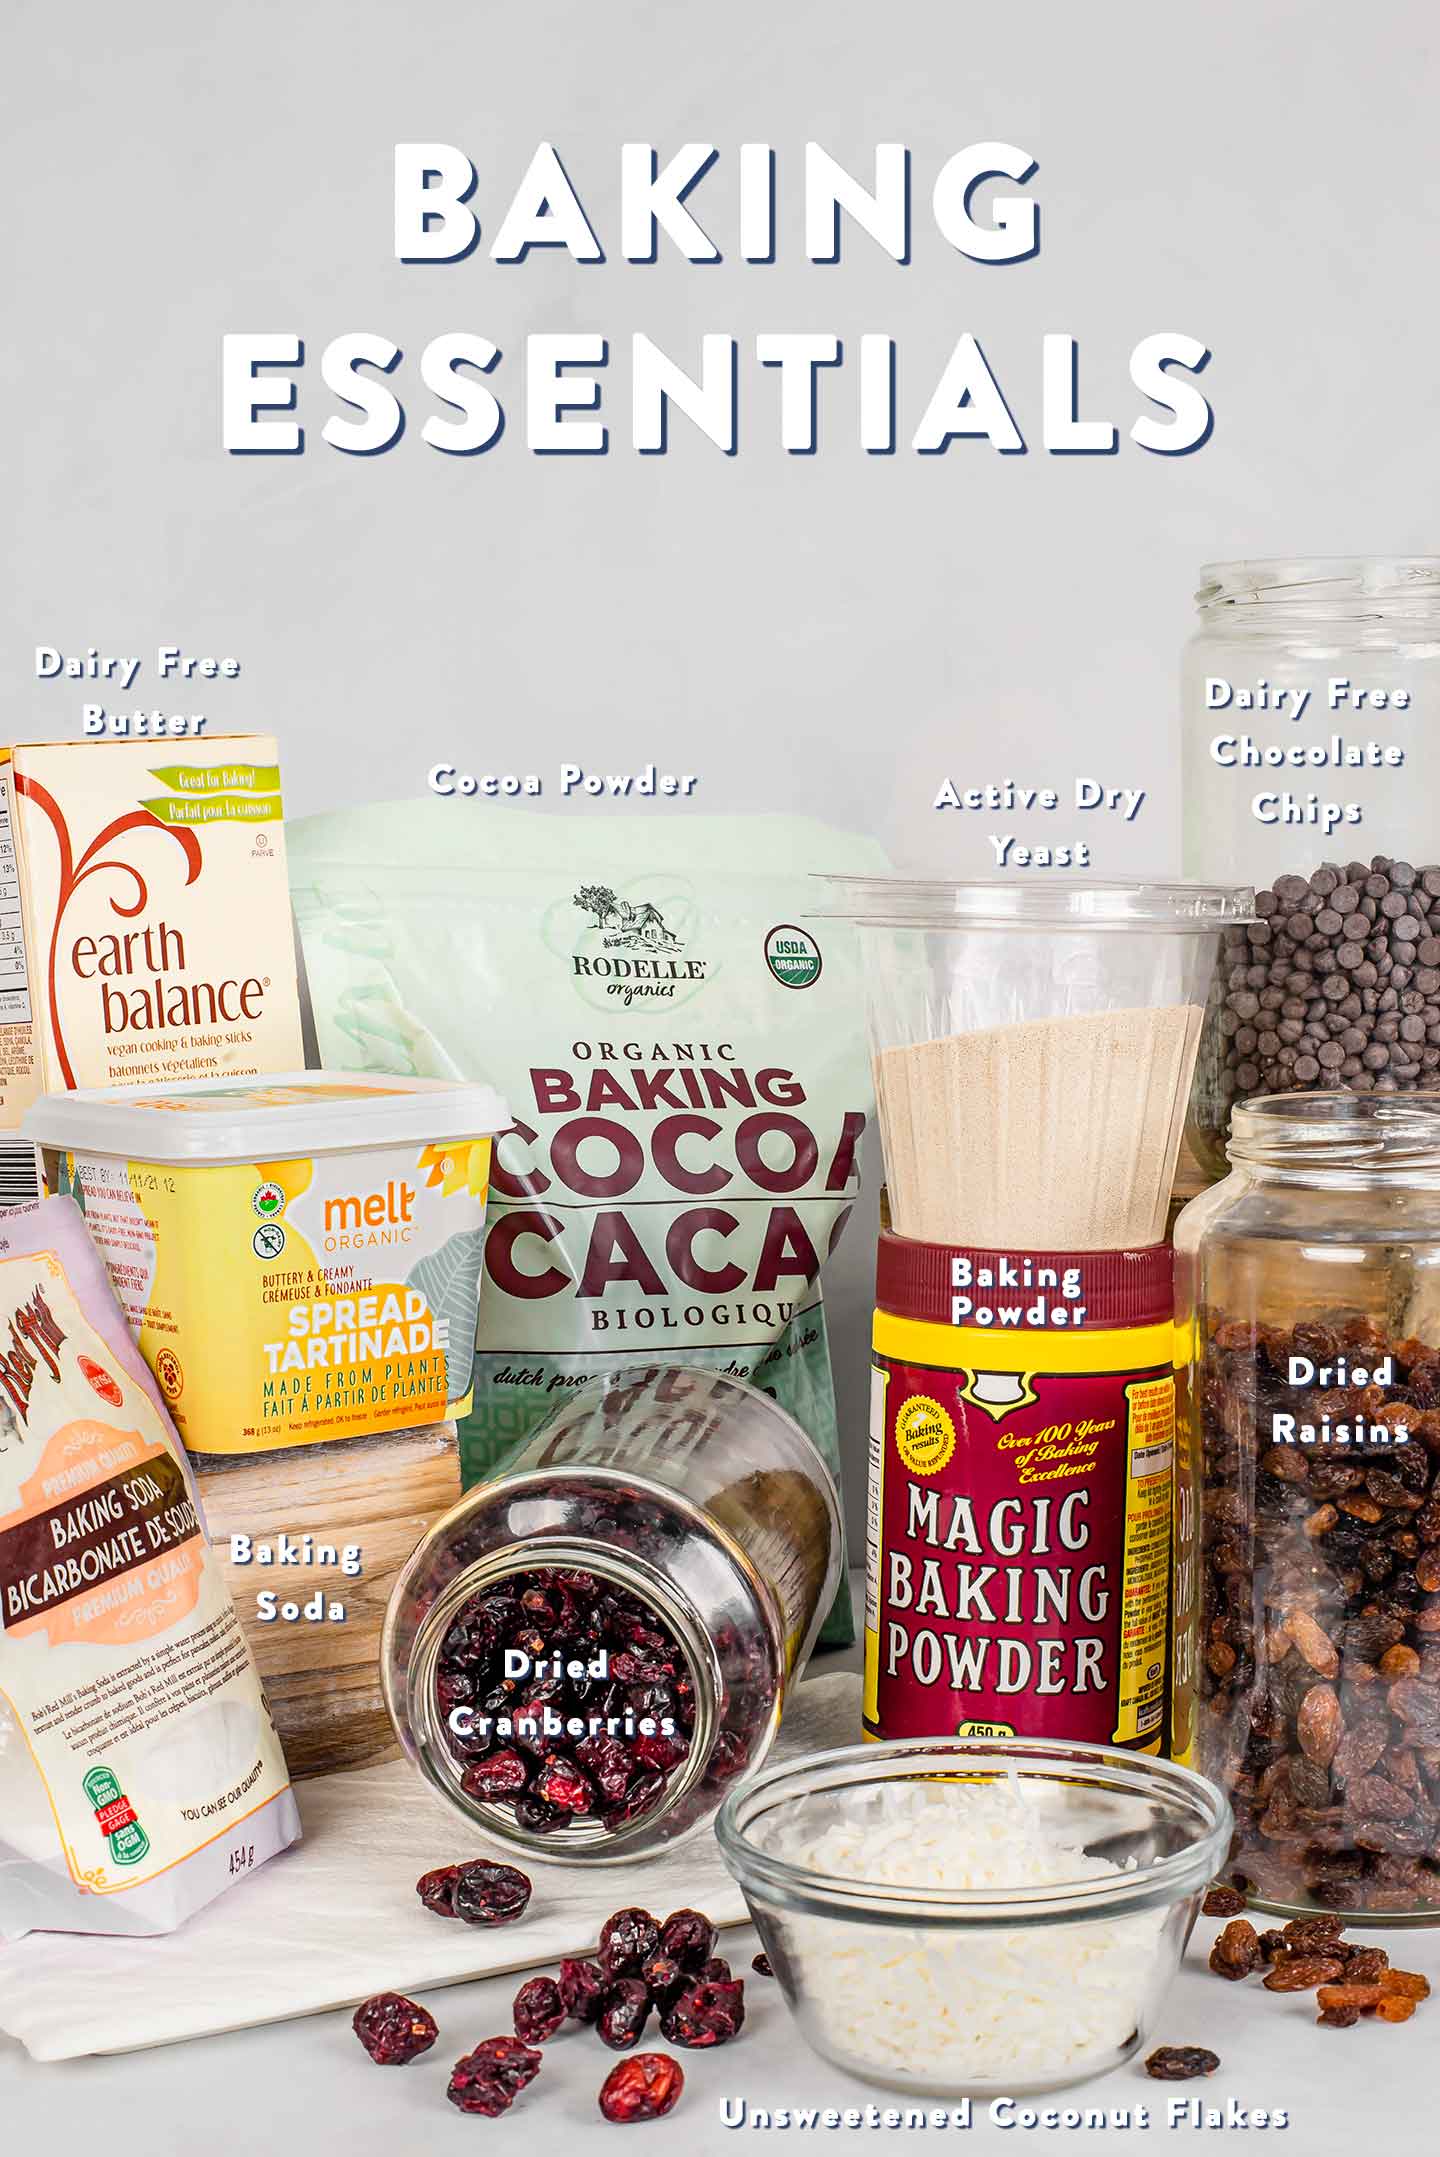 Dairy-Free Pantry Essentials for Holiday Baking - My Life After Dairy